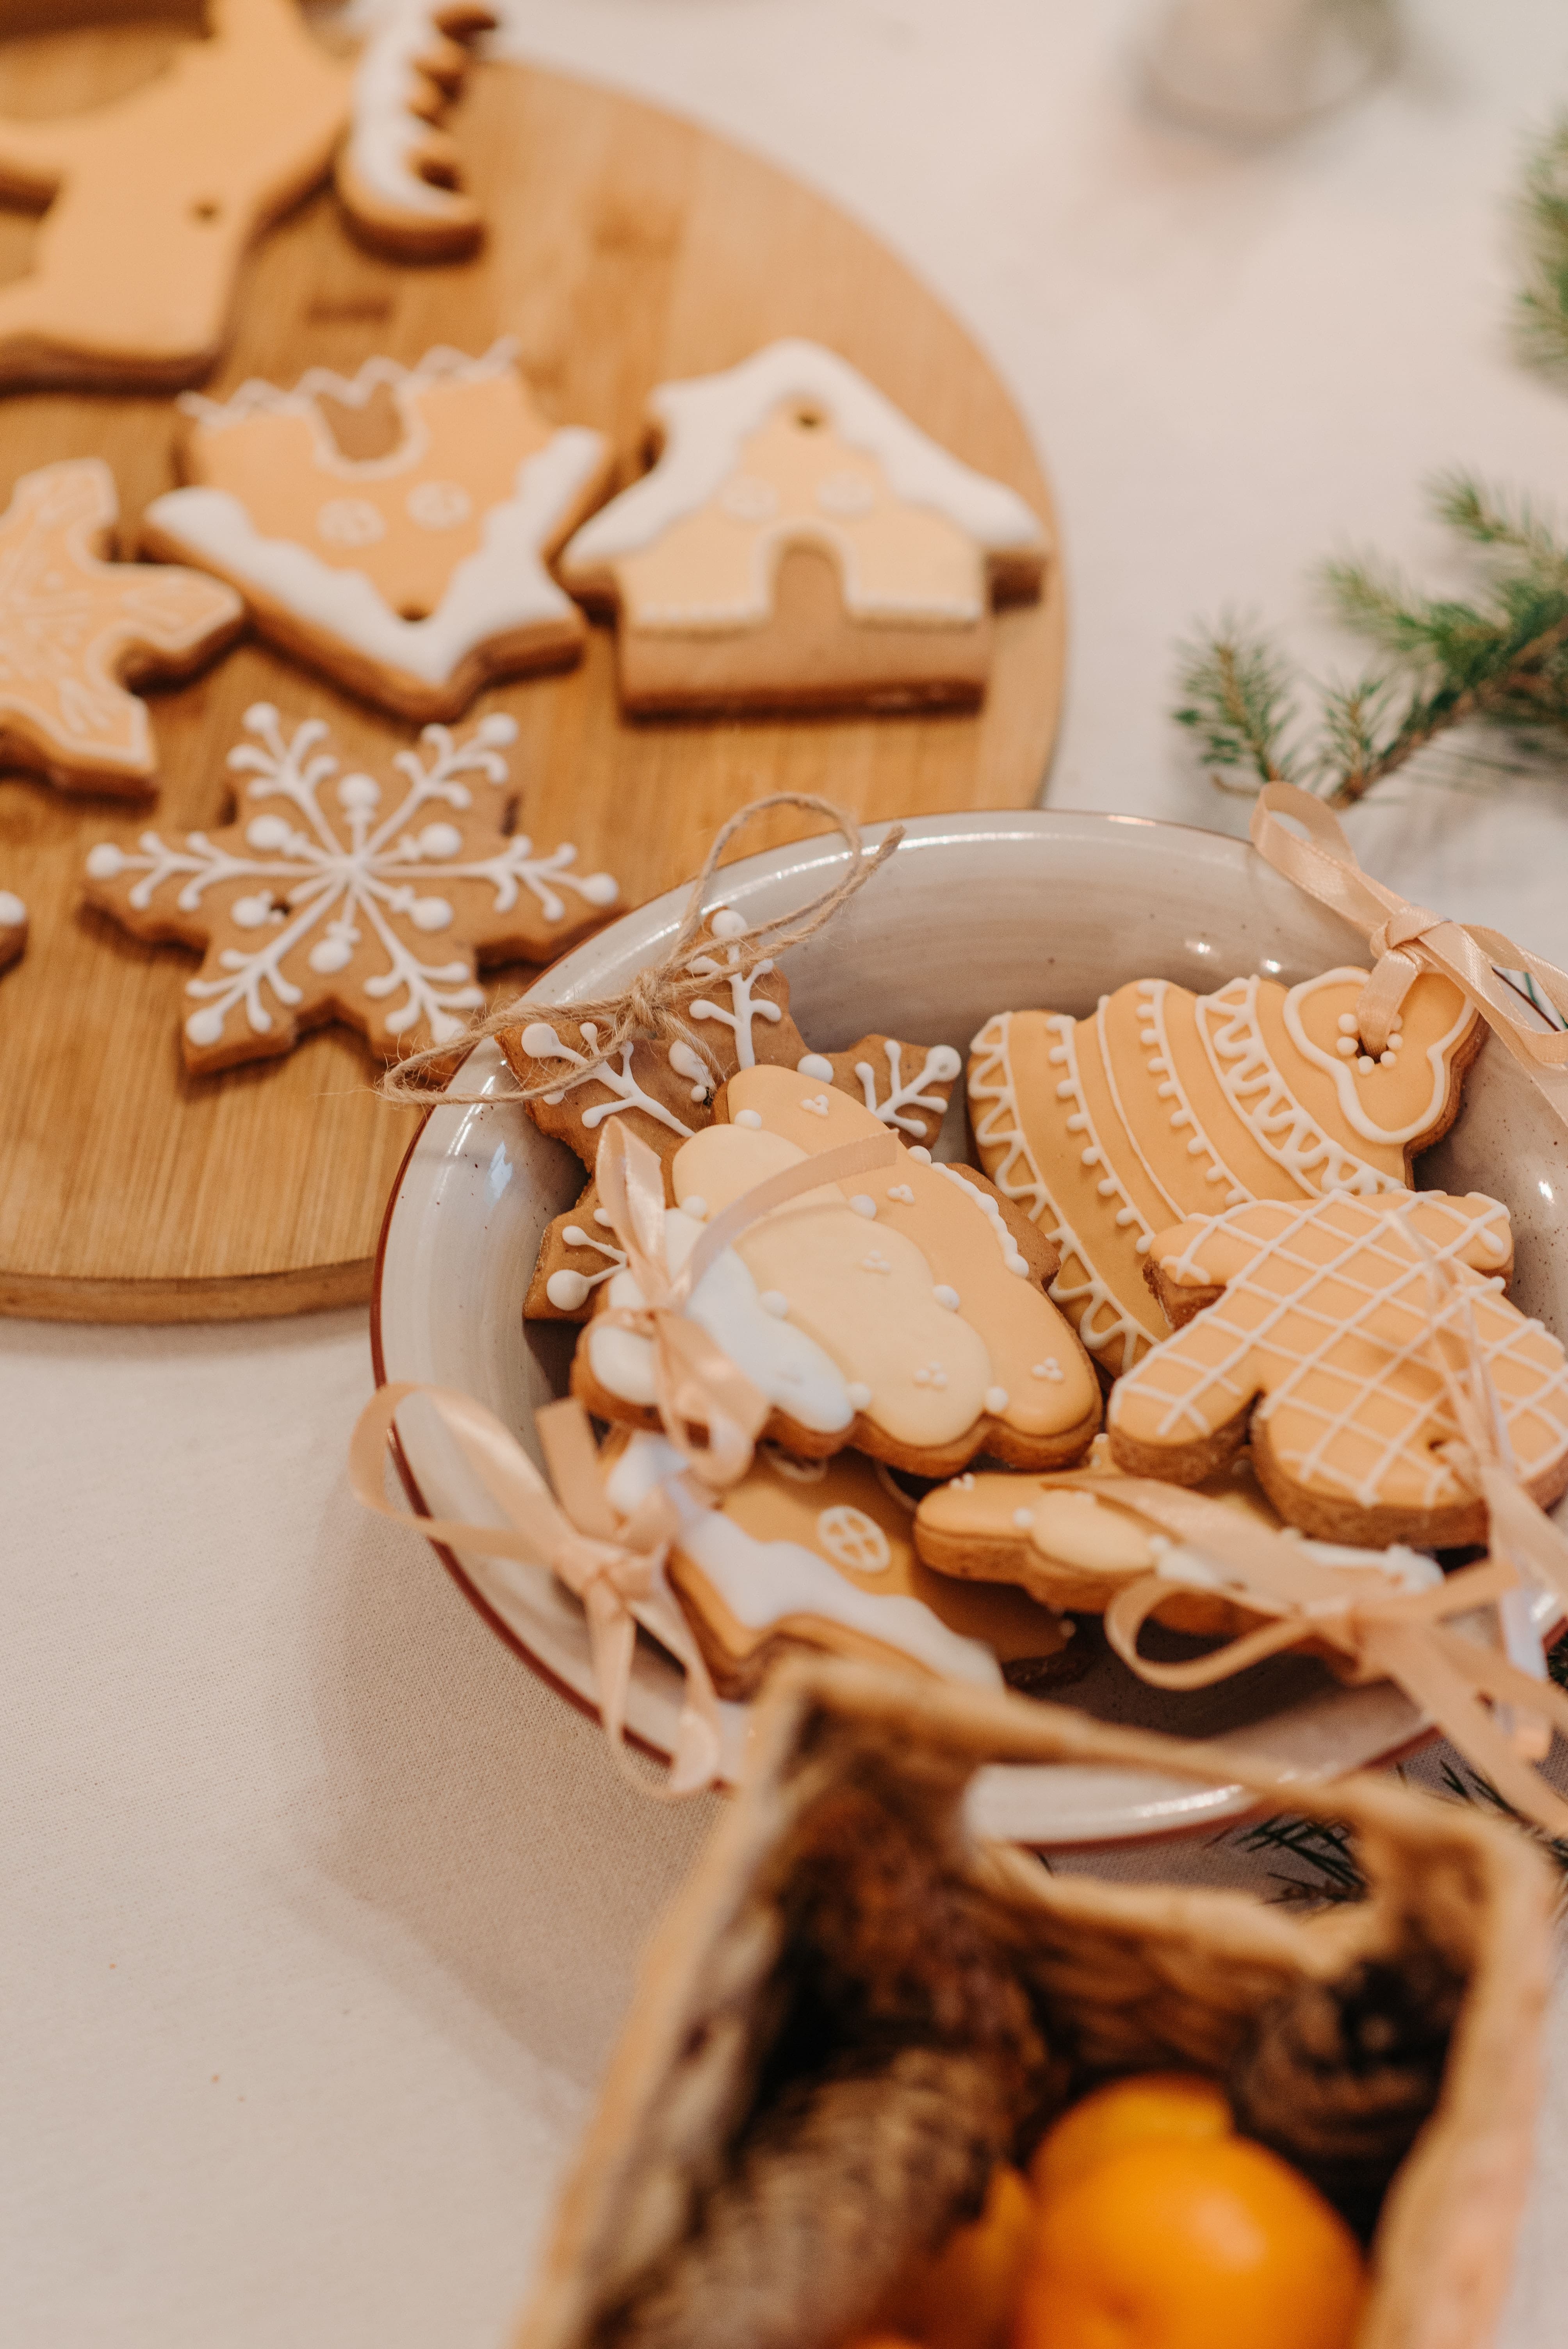 An image of sugar cookies and seasonings to represent bulk spices for winter baking.